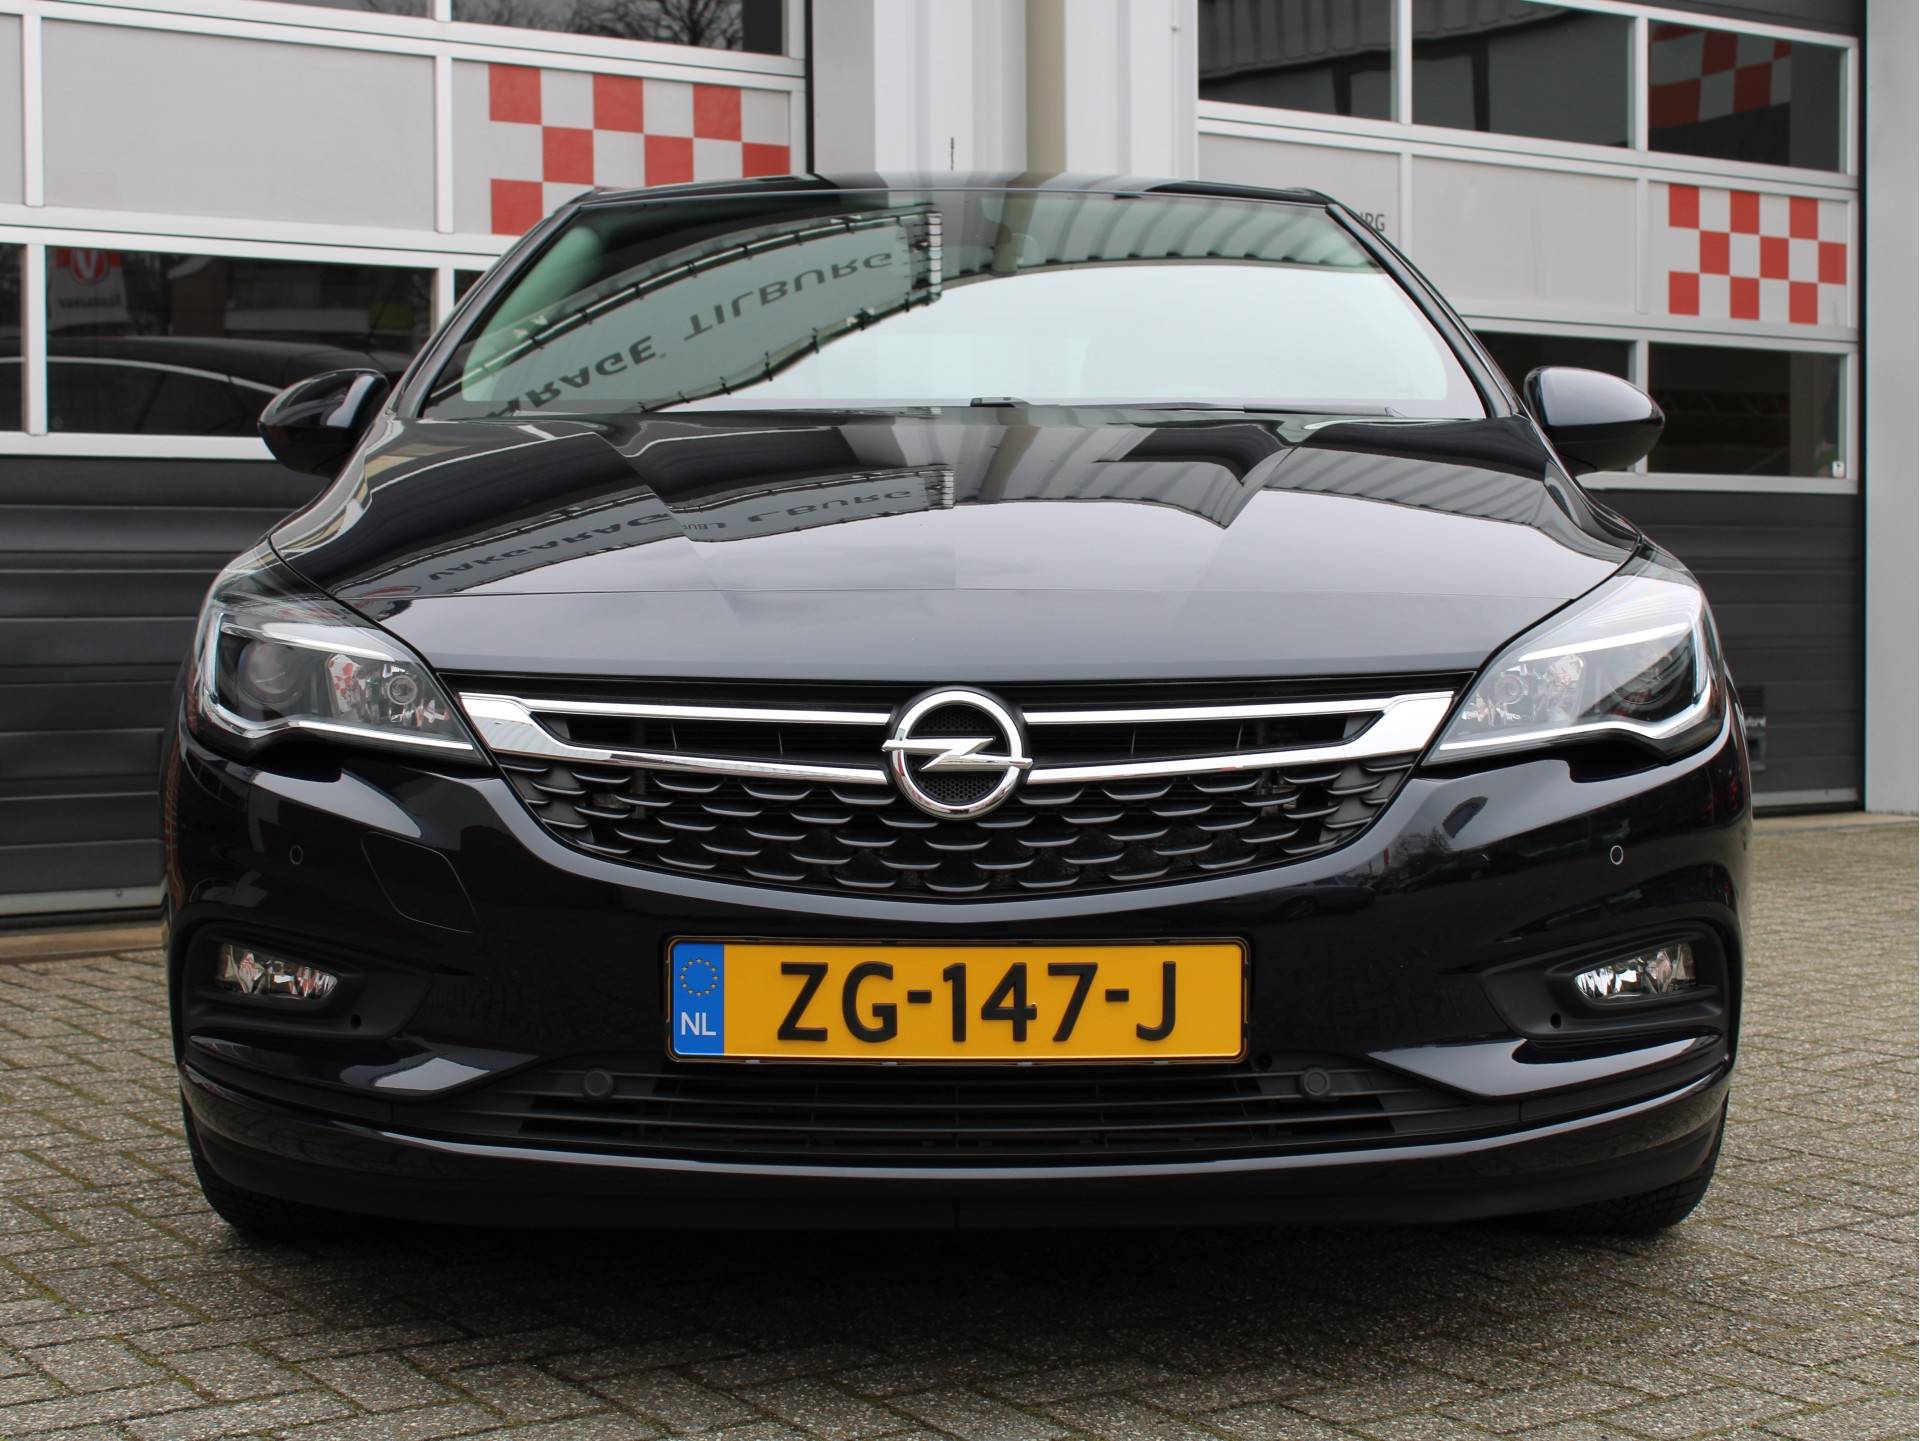 Opel Astra 1.4 Turbo 120Jaar Edition 150PK Automaat /NAVI/PDC/Climate/Cruise control/DAB+/LED/Apple carplay/Android auto/Donker glas/NAP! 1e eig! - 30/41